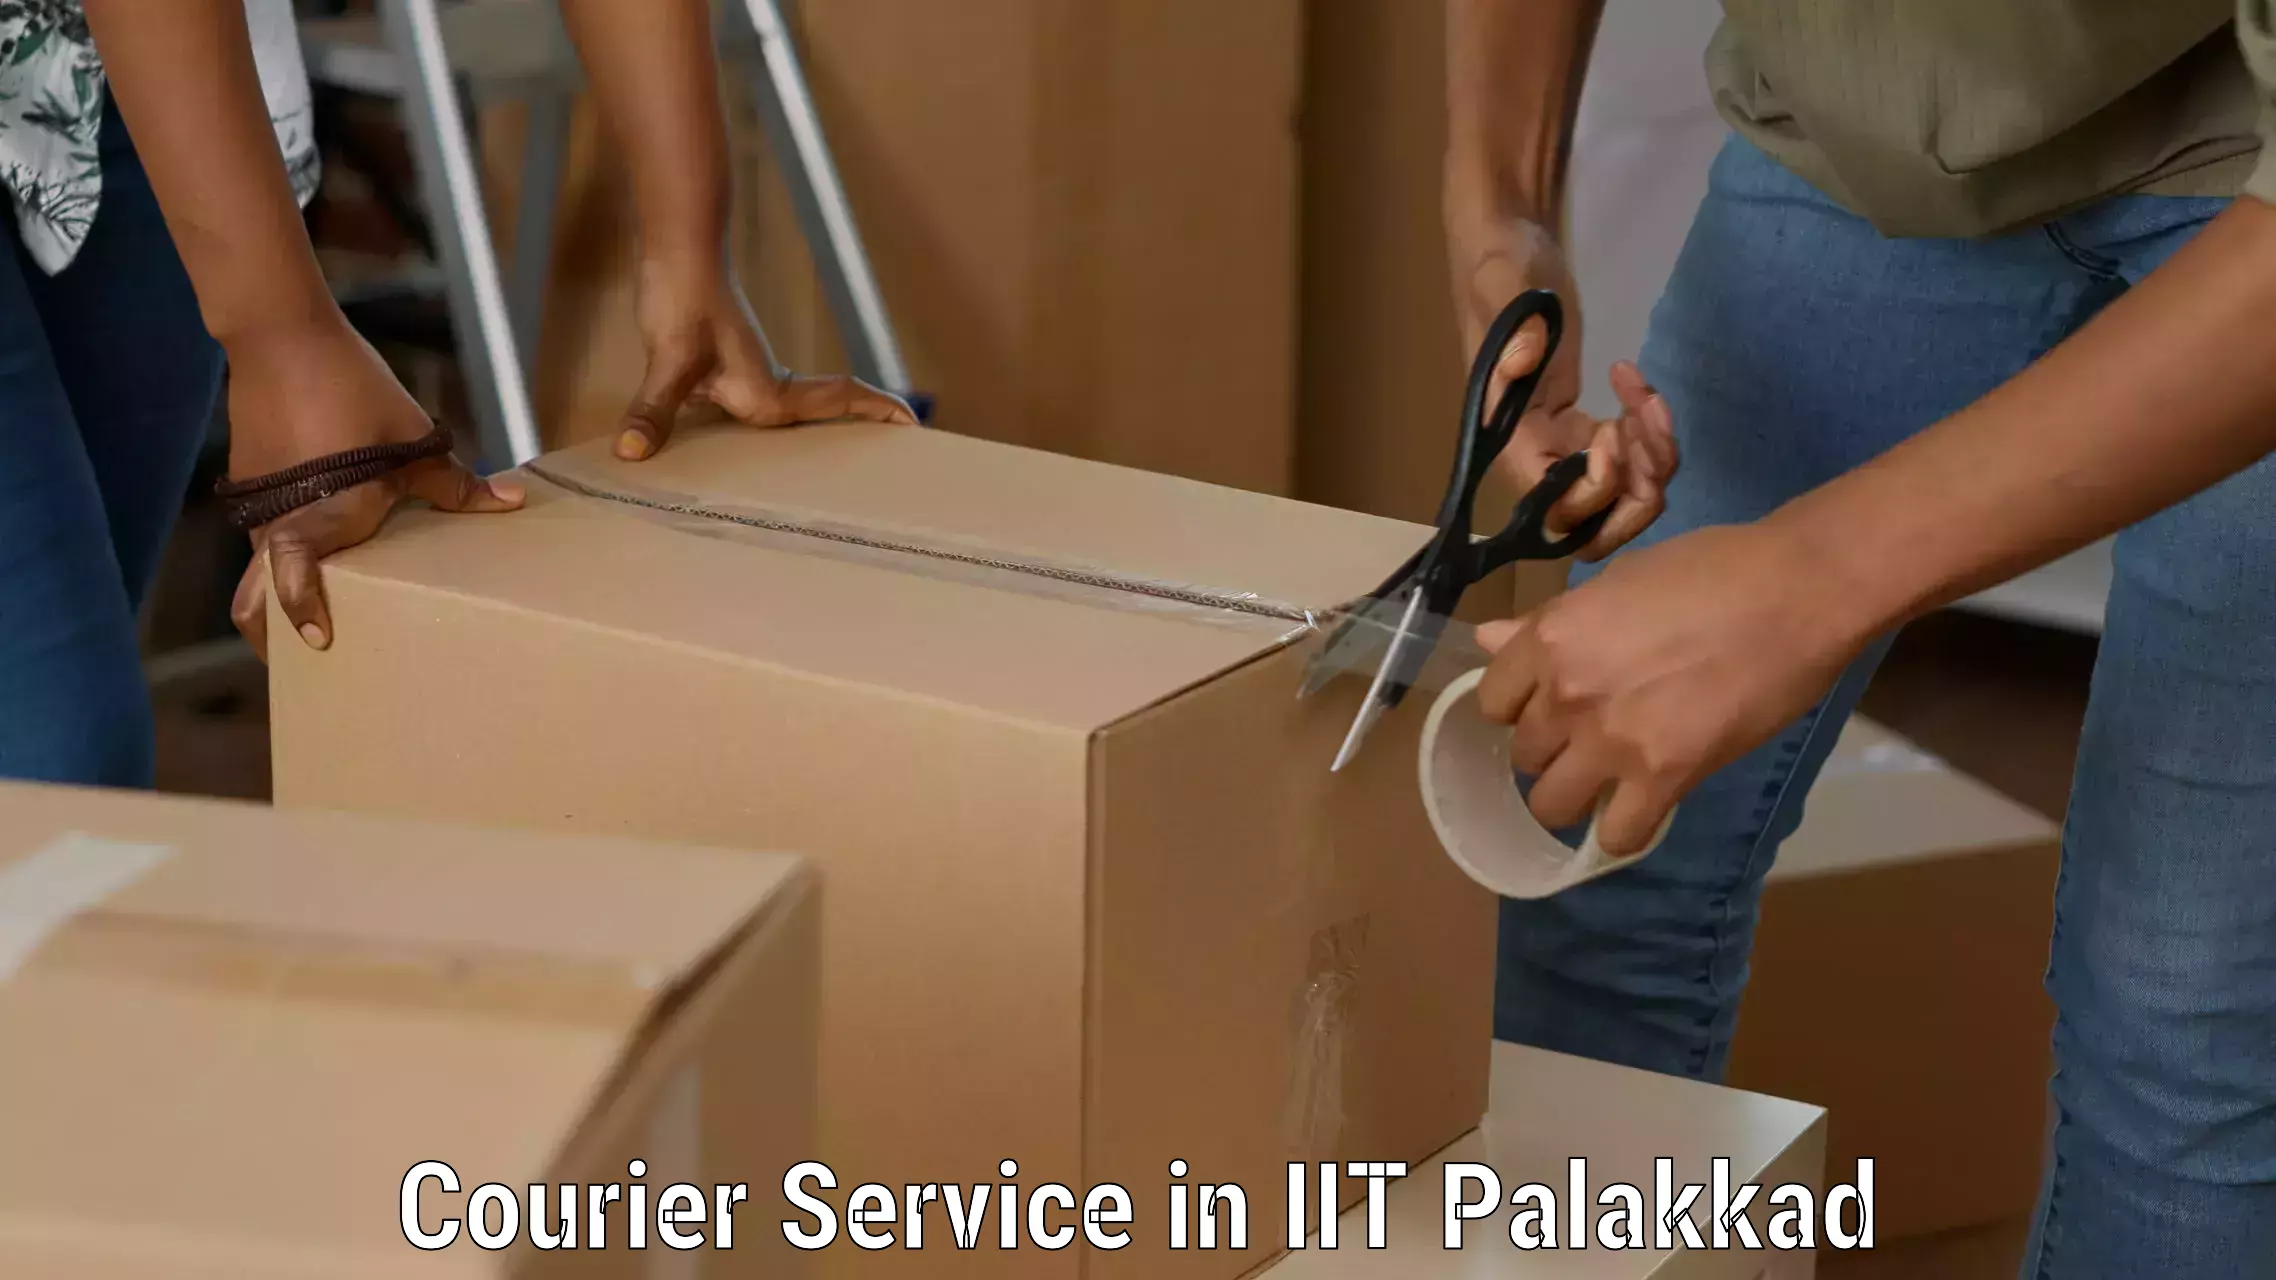 Express package transport in IIT Palakkad